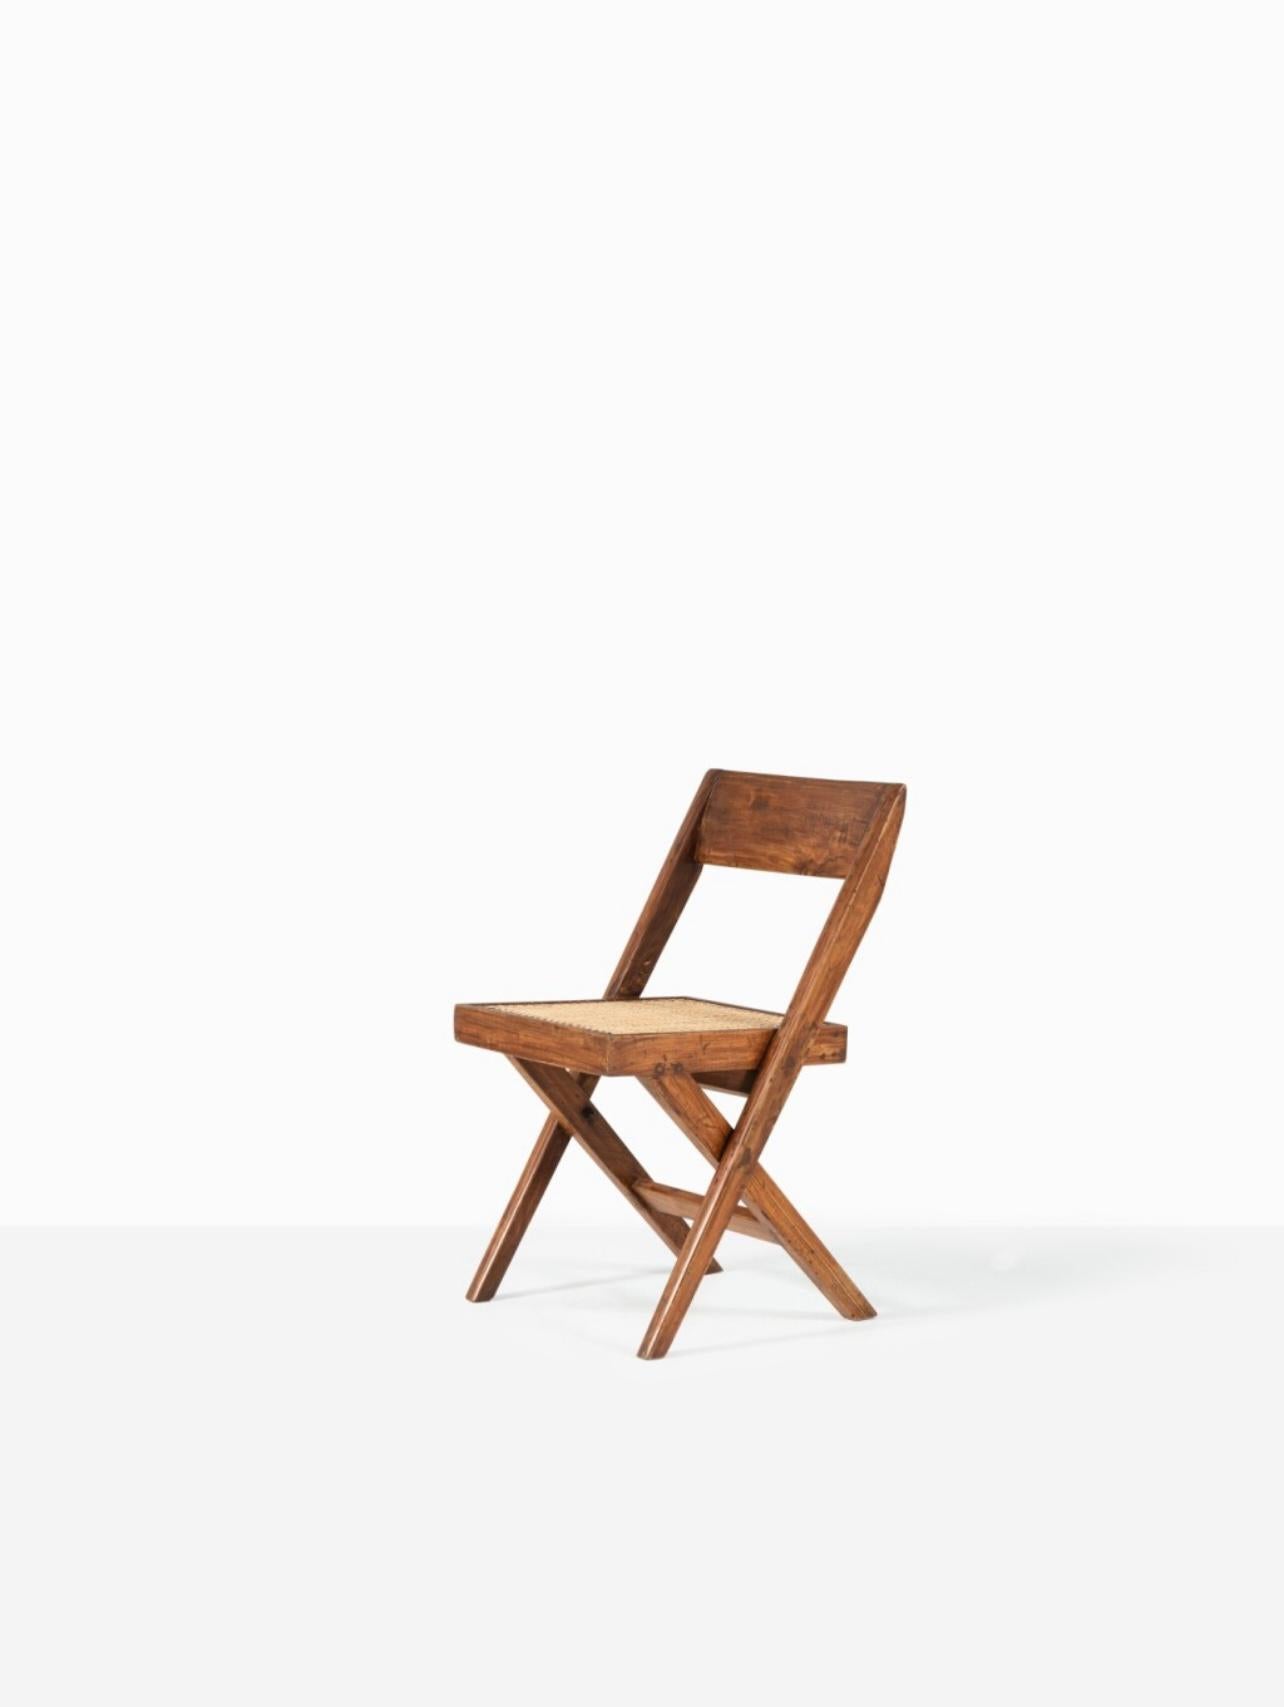 Pierre Jeanneret chairs.